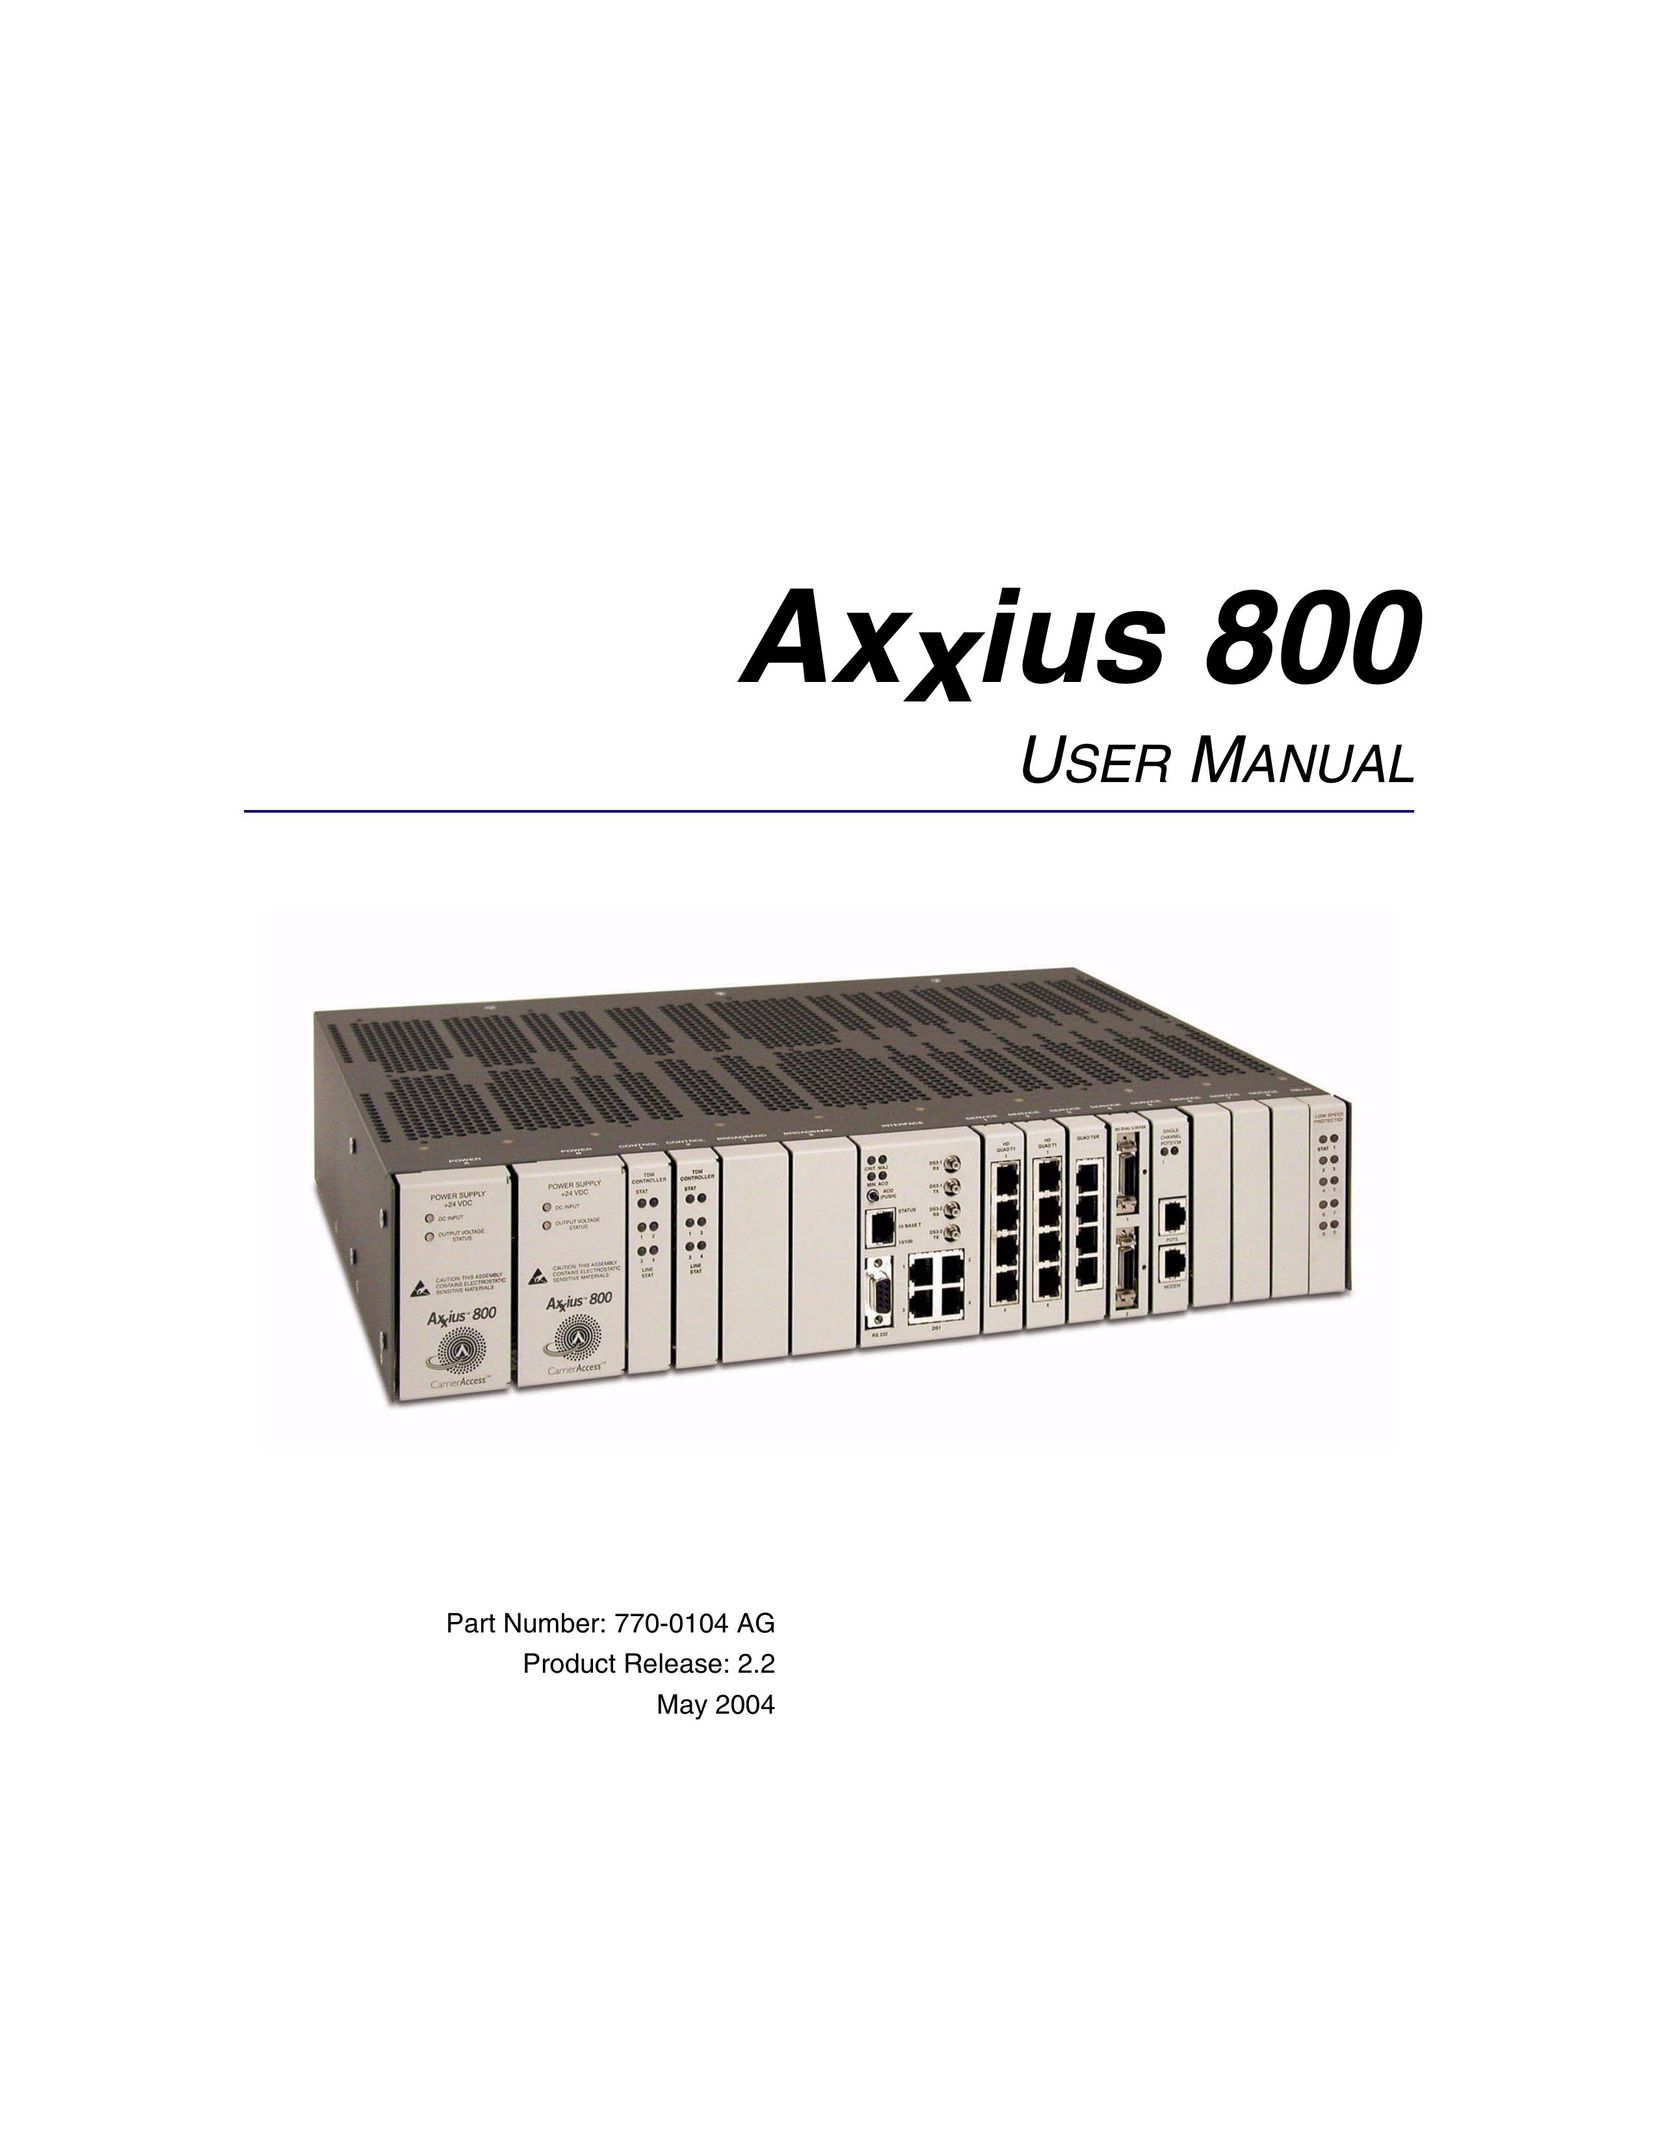 Carrier Access Axxius 800 Network Card User Manual